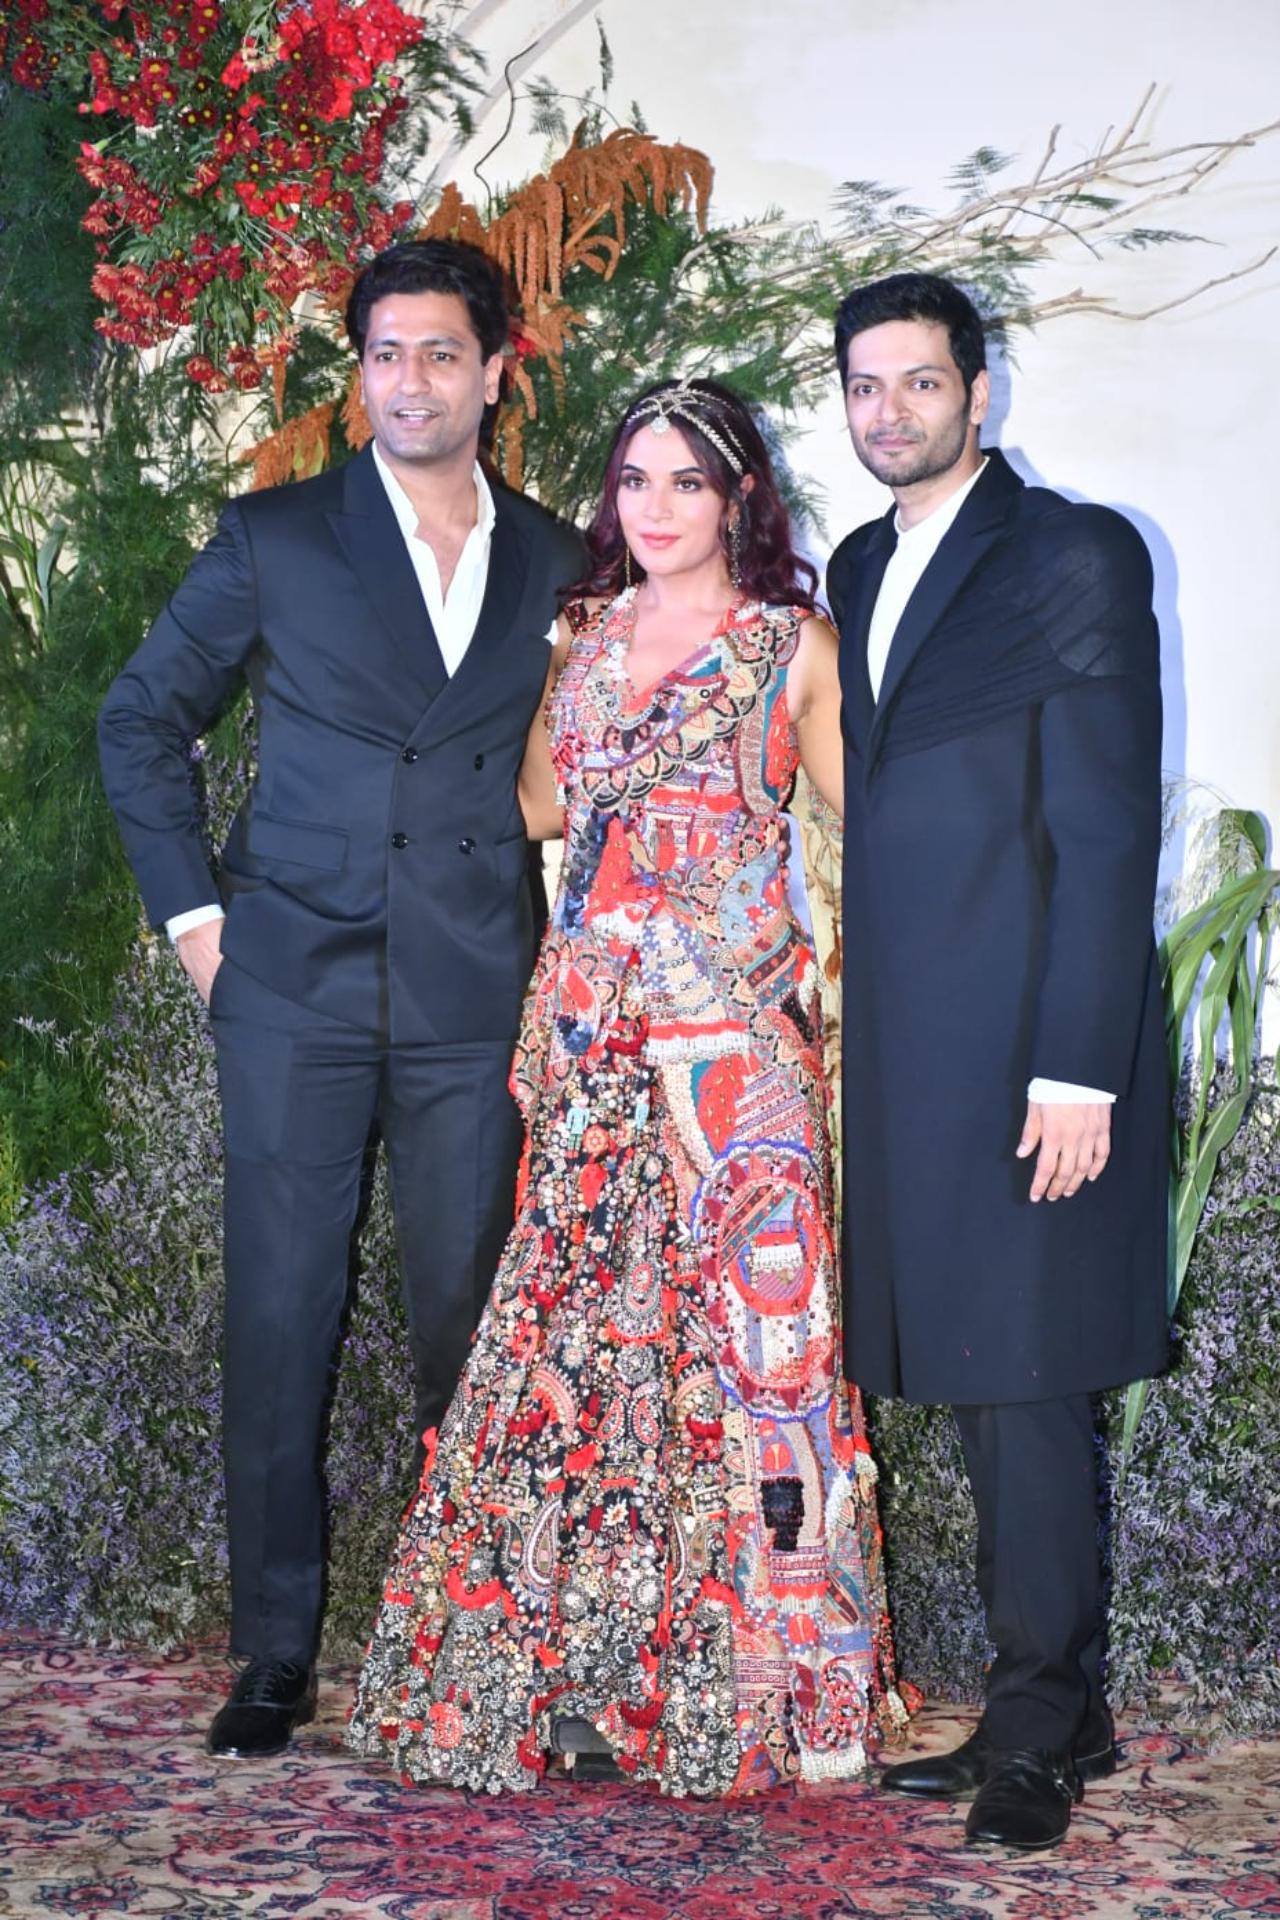 Vicky Kaushal made a solo entry. He was seen sporting a clean shaved look and for the outfit, he went with the classic black and white suit. He was also joined by Richa and Ali during the photo session